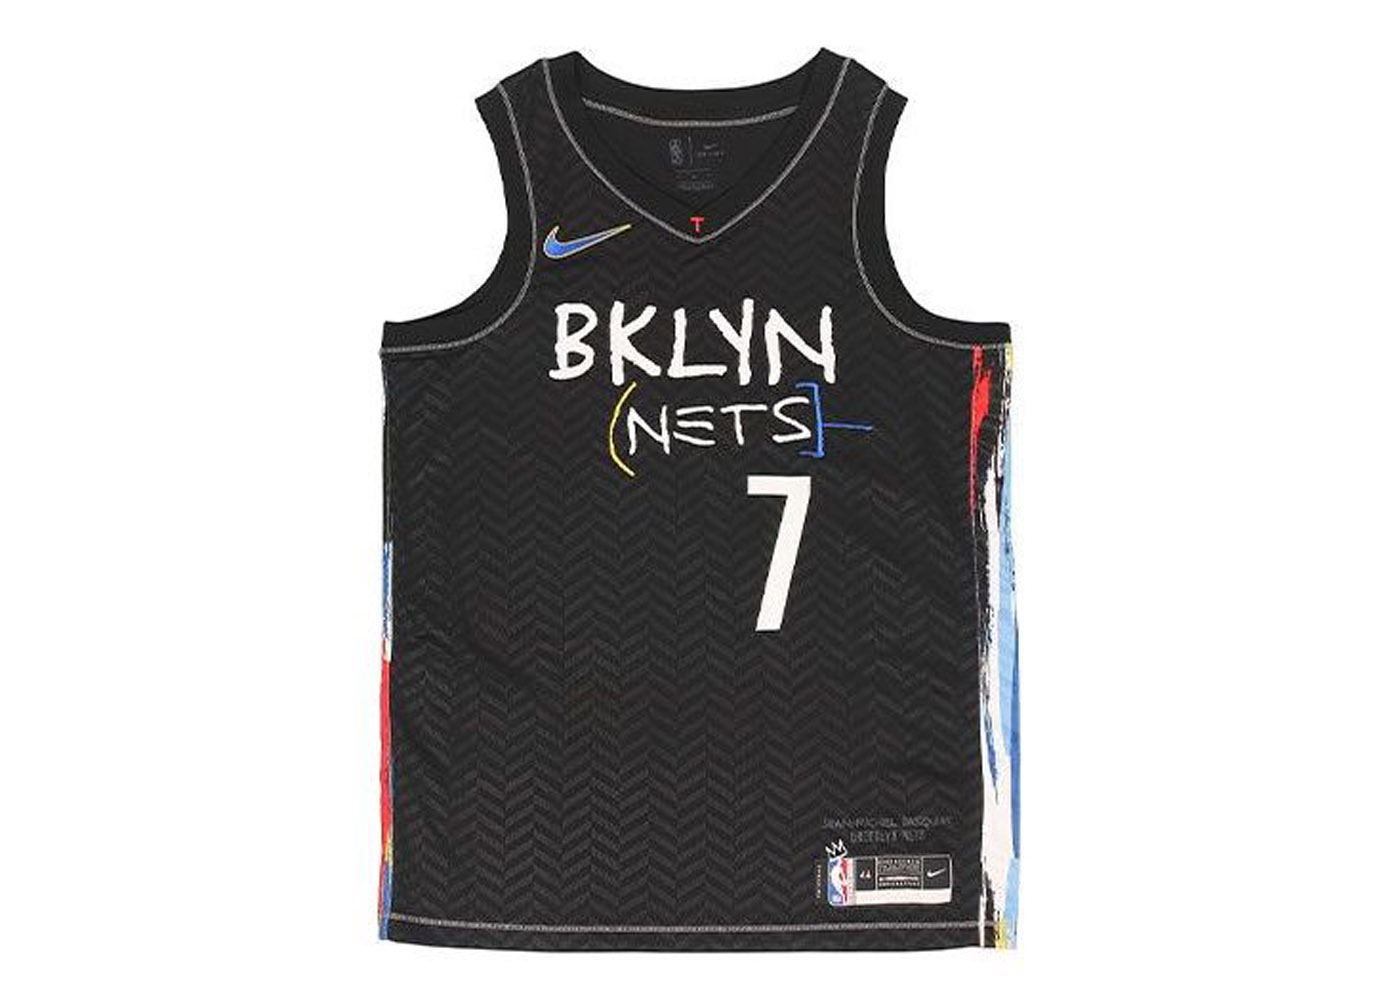 stephen curry city jersey 2021